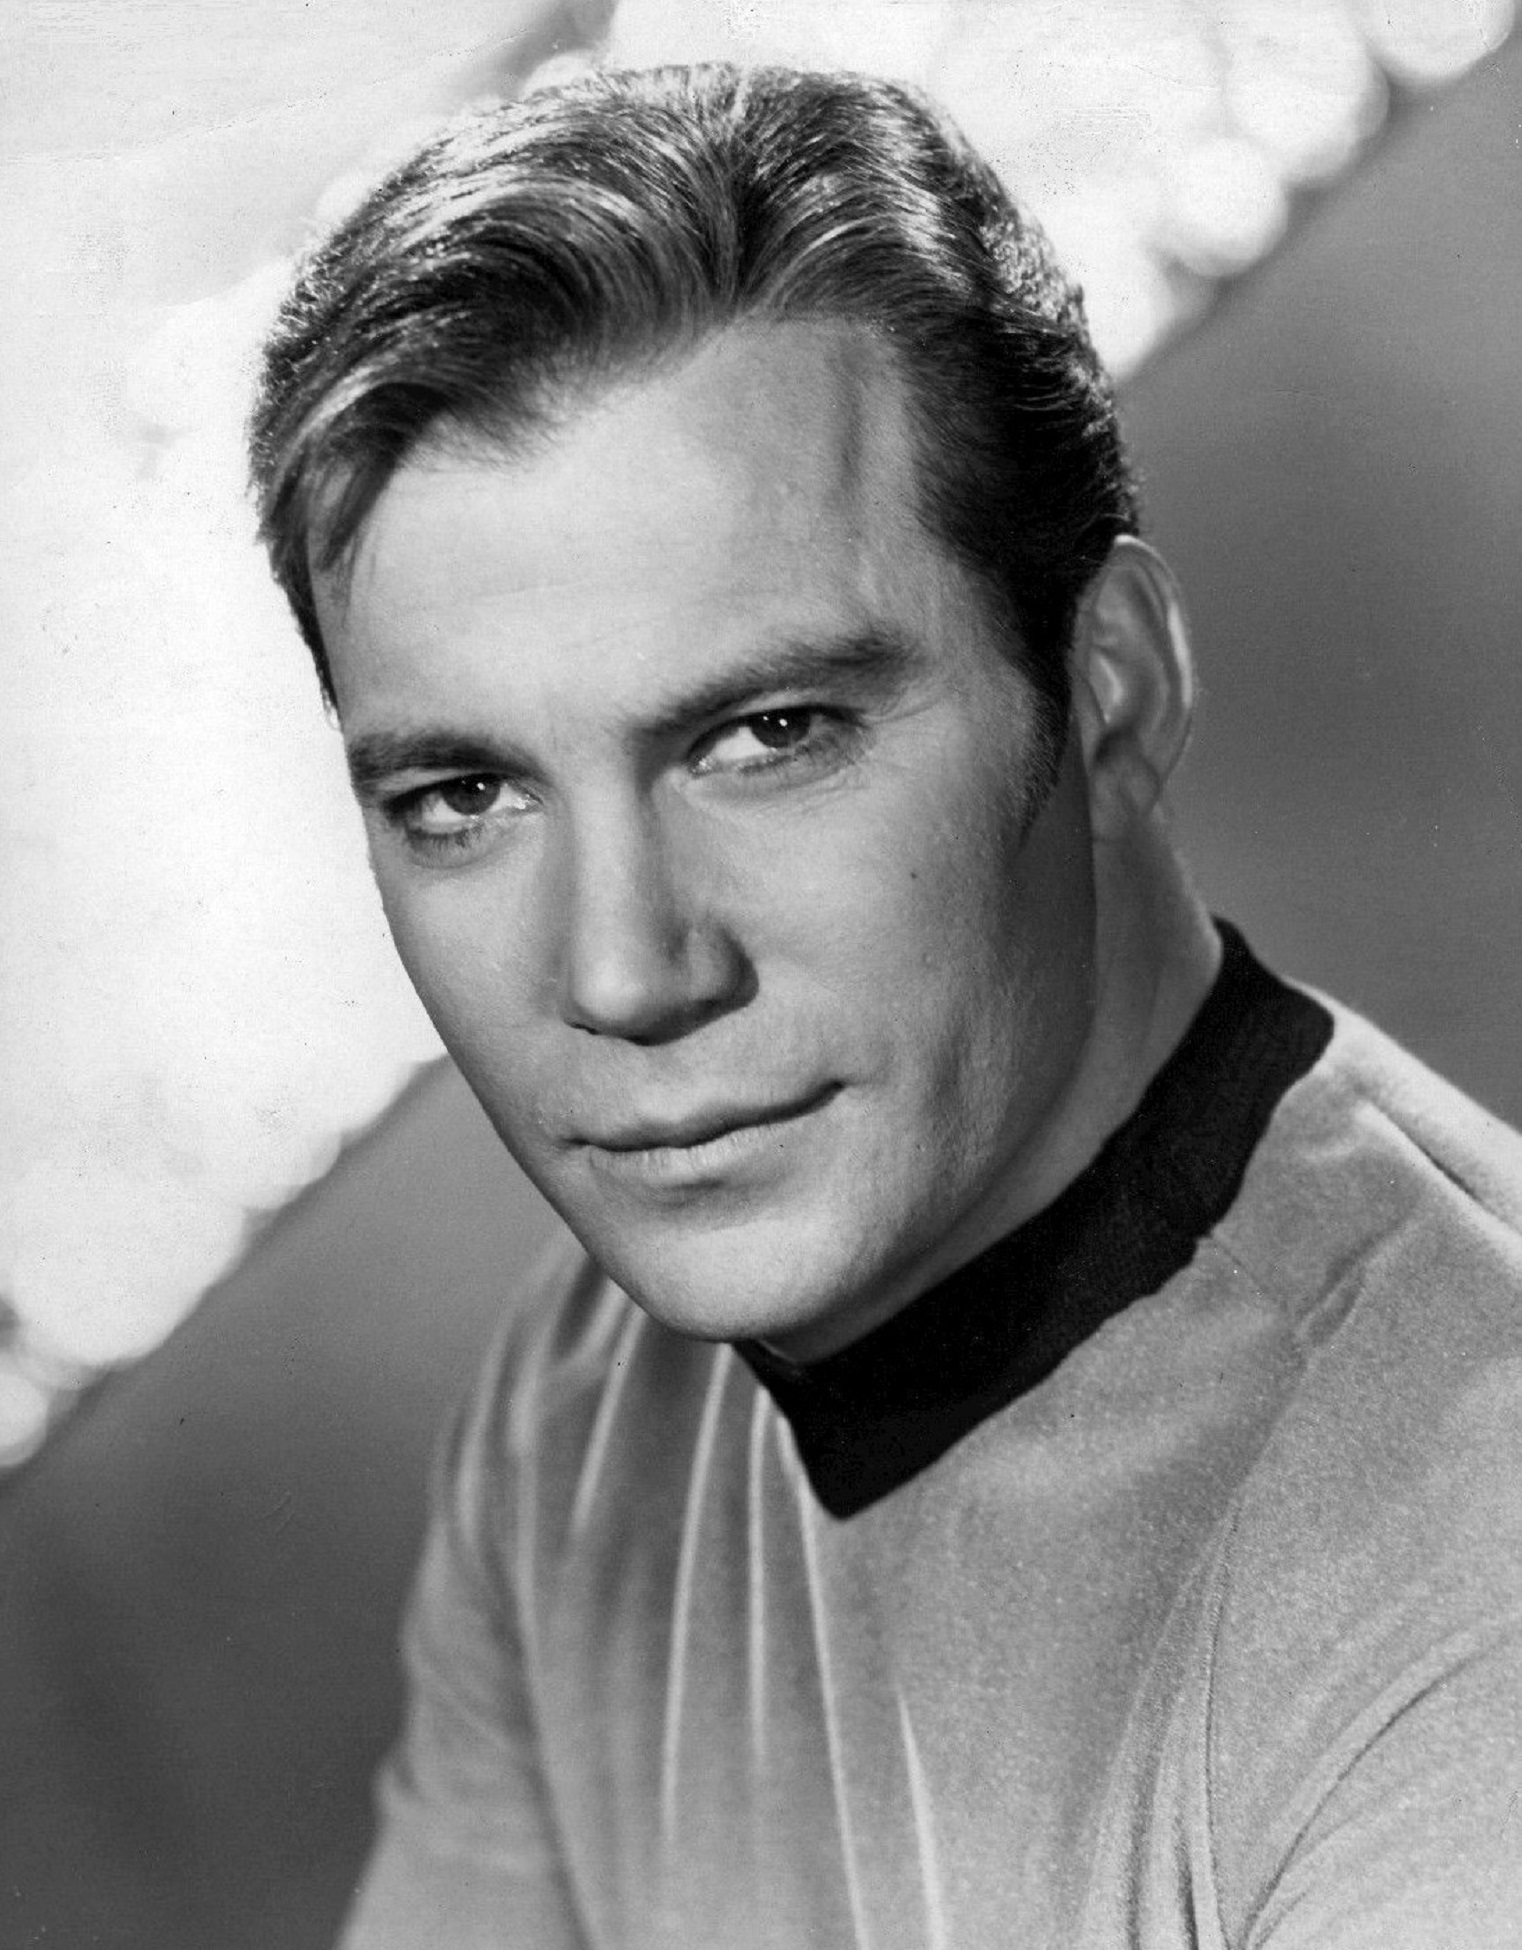 Featured image for “Captain Kirk Leadership”